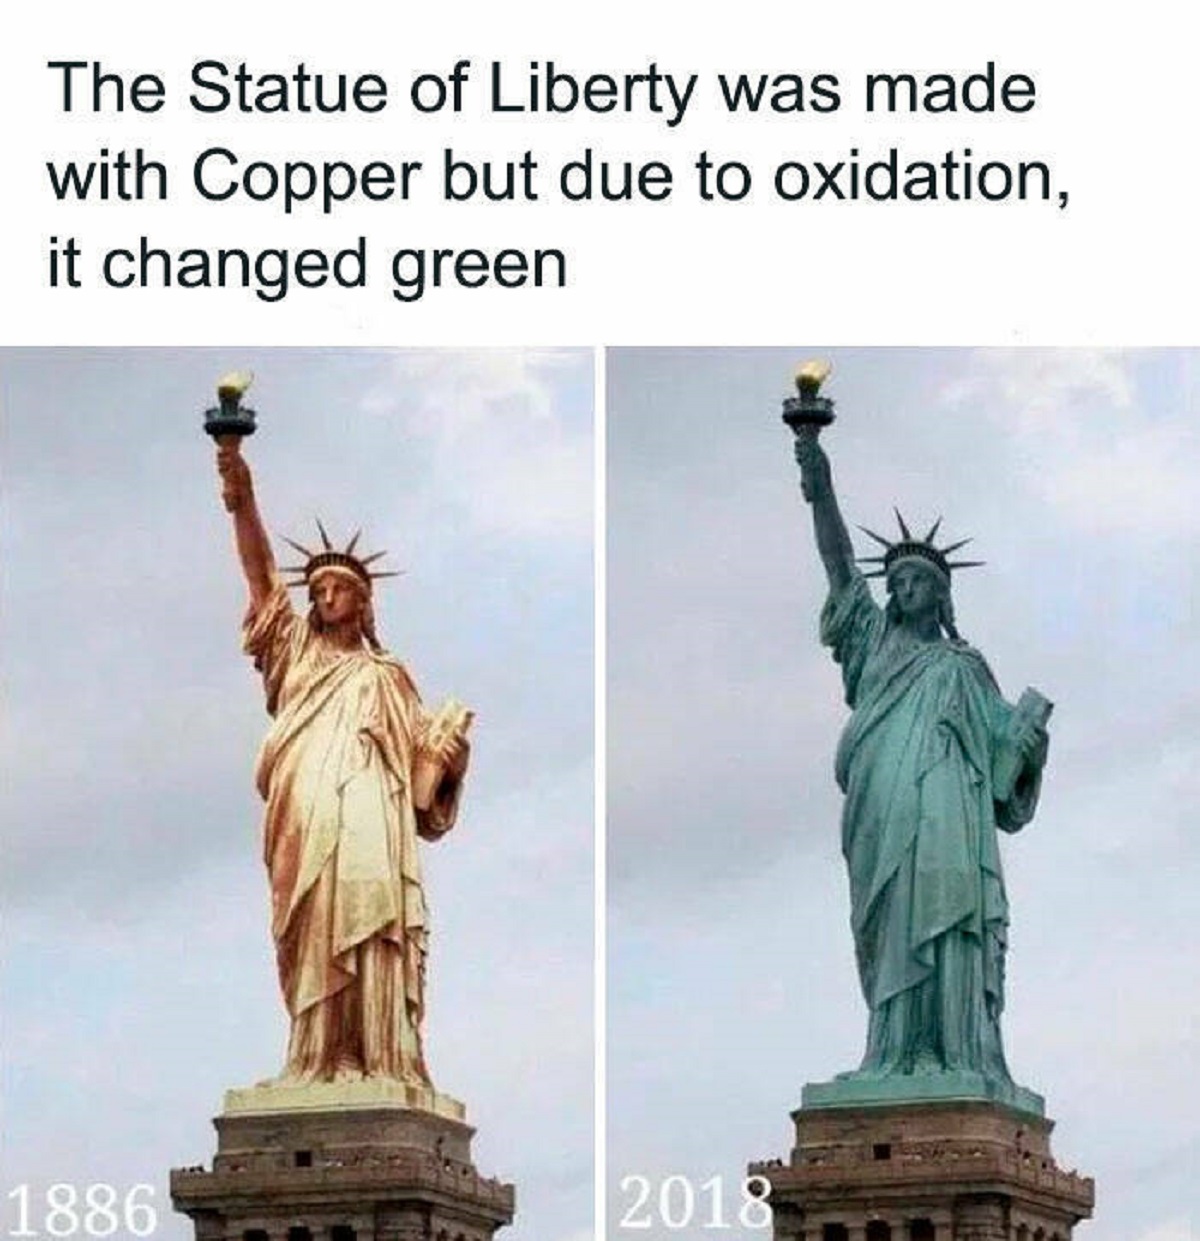 statue of liberty copper - The Statue of Liberty was made with Copper but due to oxidation, it changed green 1886 2018